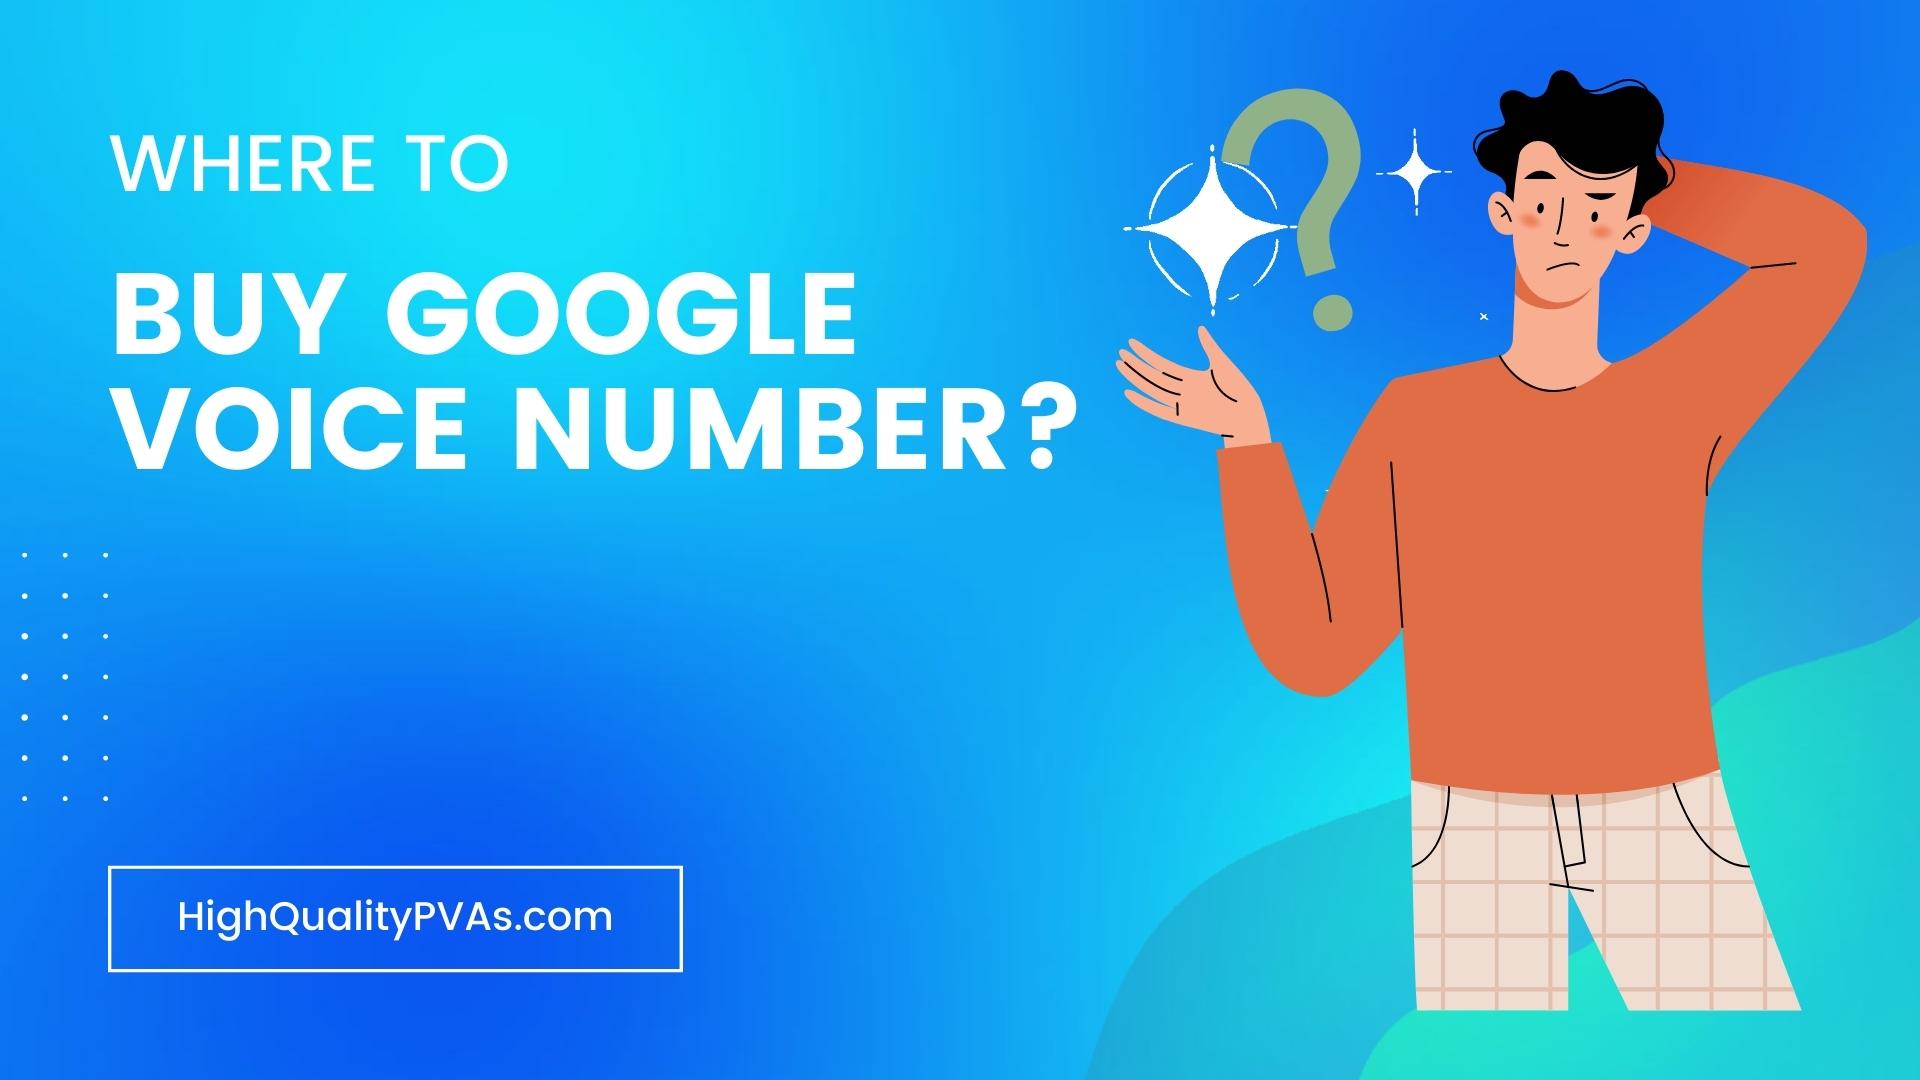 Where to Buy Google Voice Number?